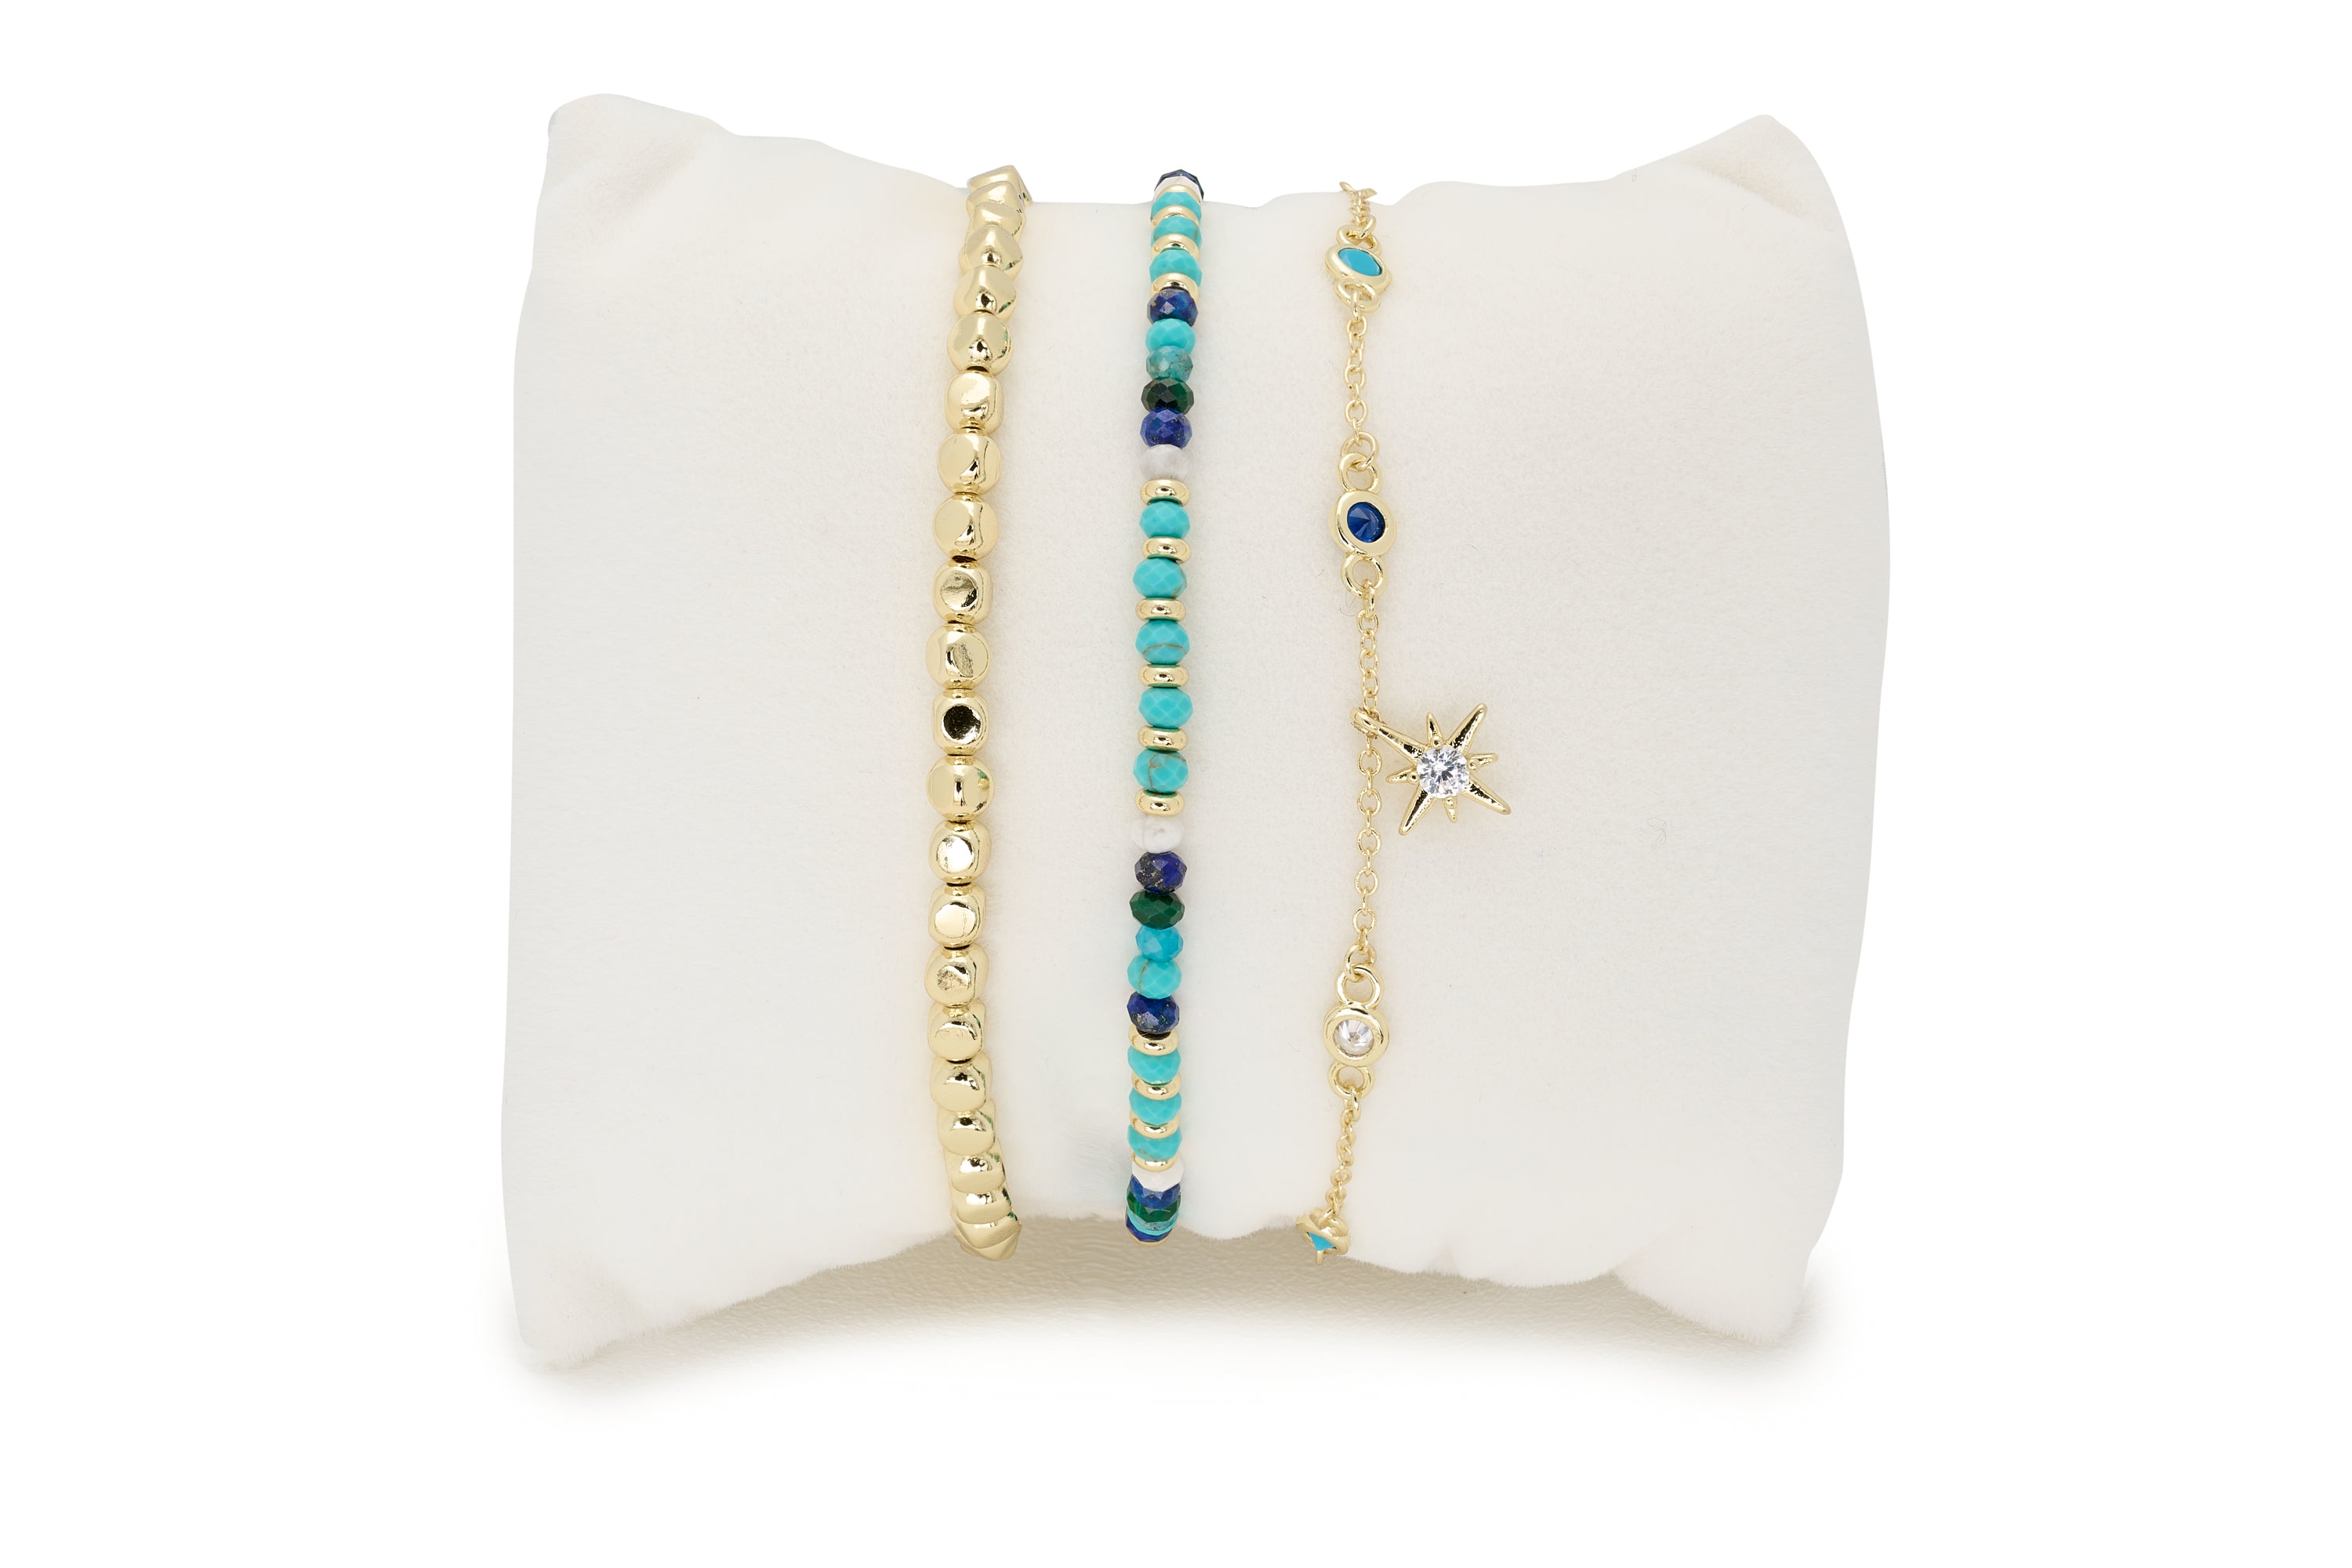 Women's Jewellery Gifts, Our Bestselling Gifts